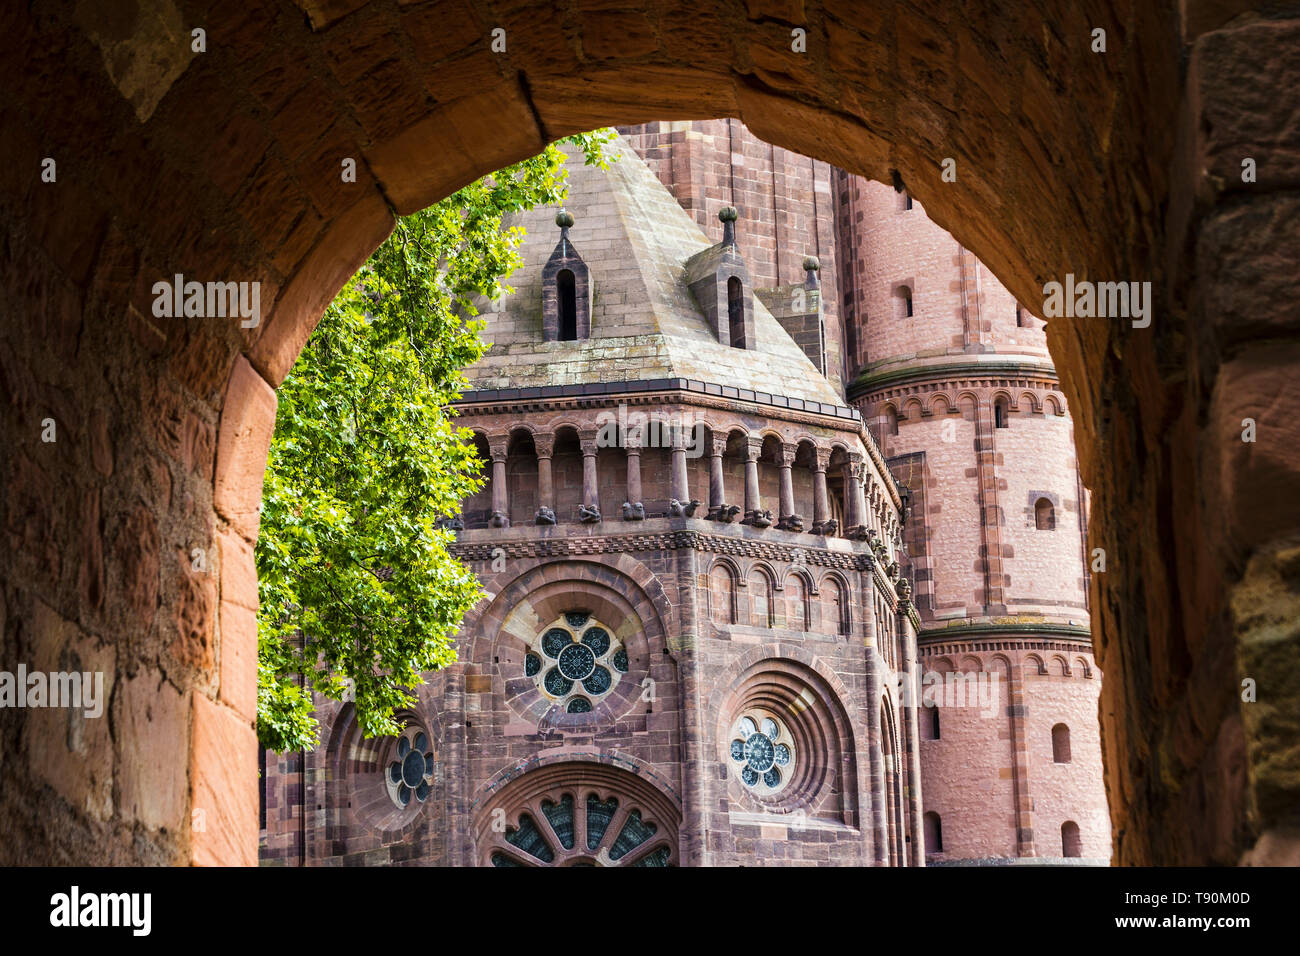 Cattedrale, Worm Foto Stock